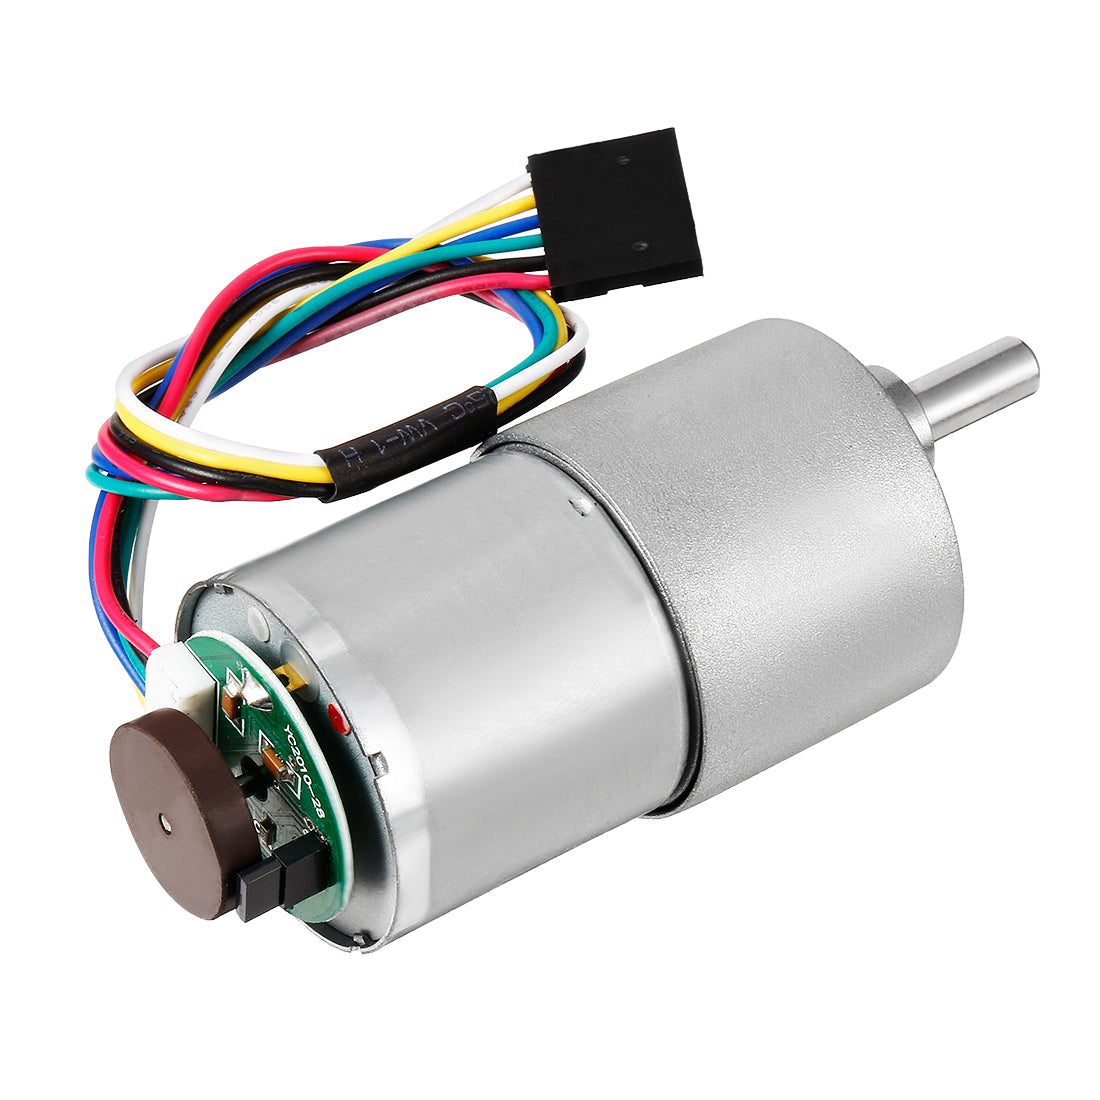 uxcell Uxcell 90:1 Gearmotor with Encoder DC 24V 111RPM Encoder Gear Motor 37Dx54L mm